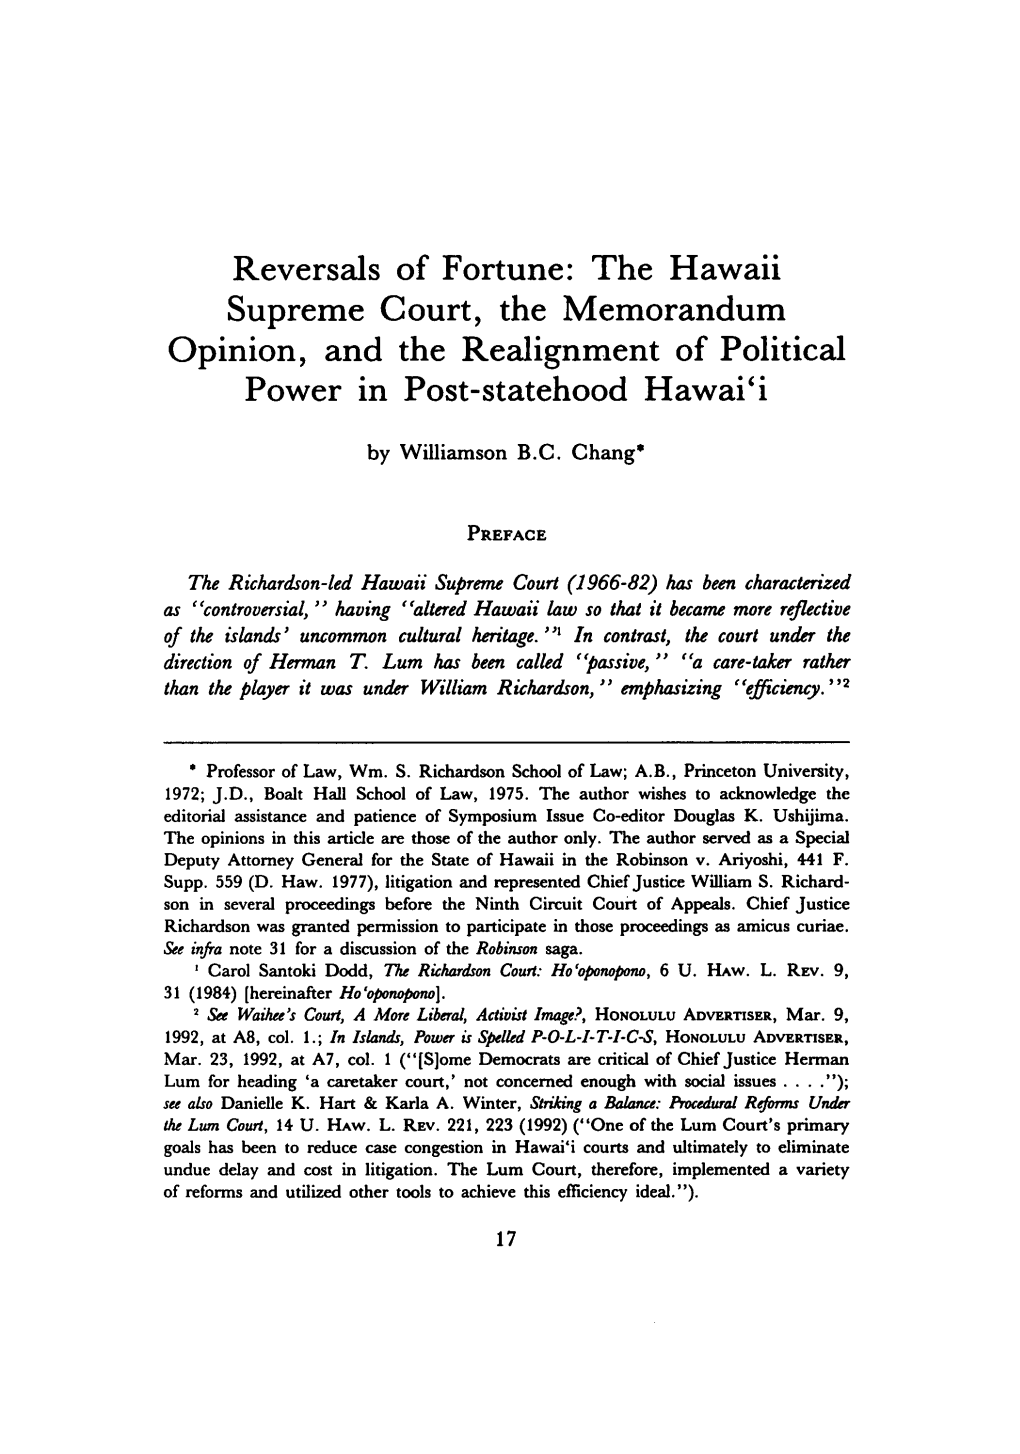 The Hawaii Supreme Court, the Memorandum Opinion, and the Realignment of Political Power in Post-Statehood Hawai'i